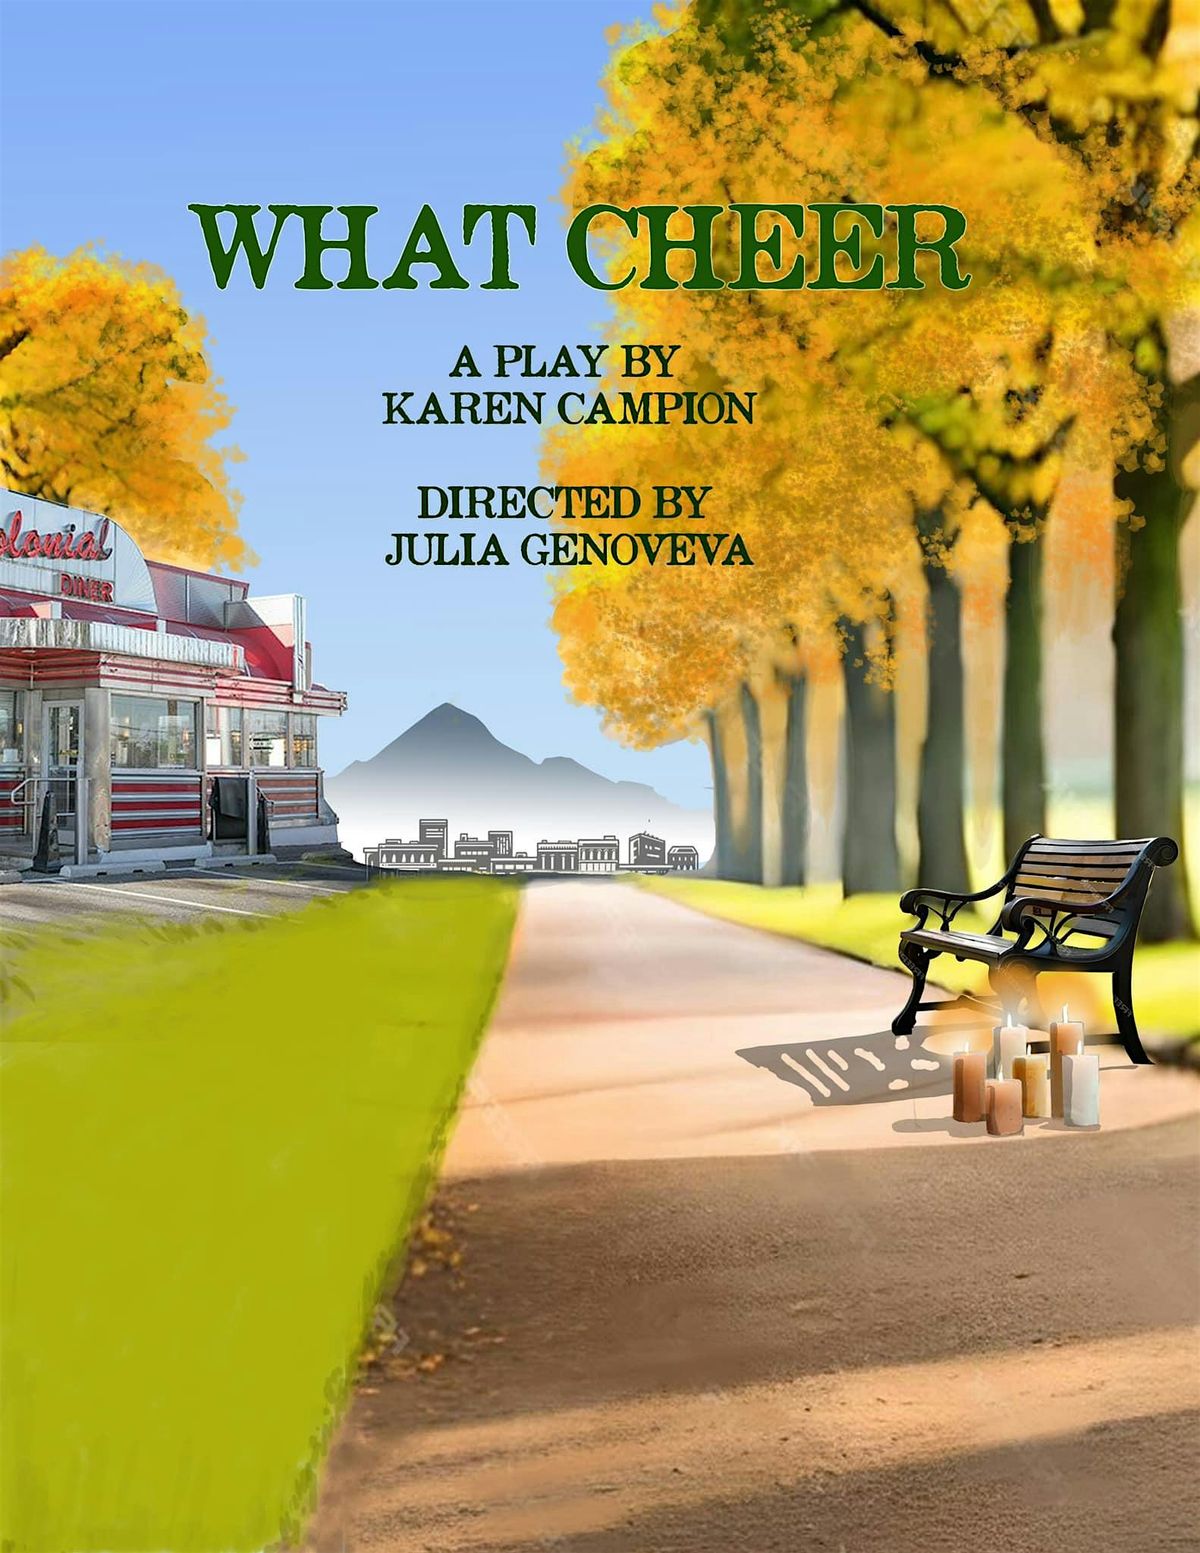 Genoveva Productions Presents: What Cheer Written by Karen Campion